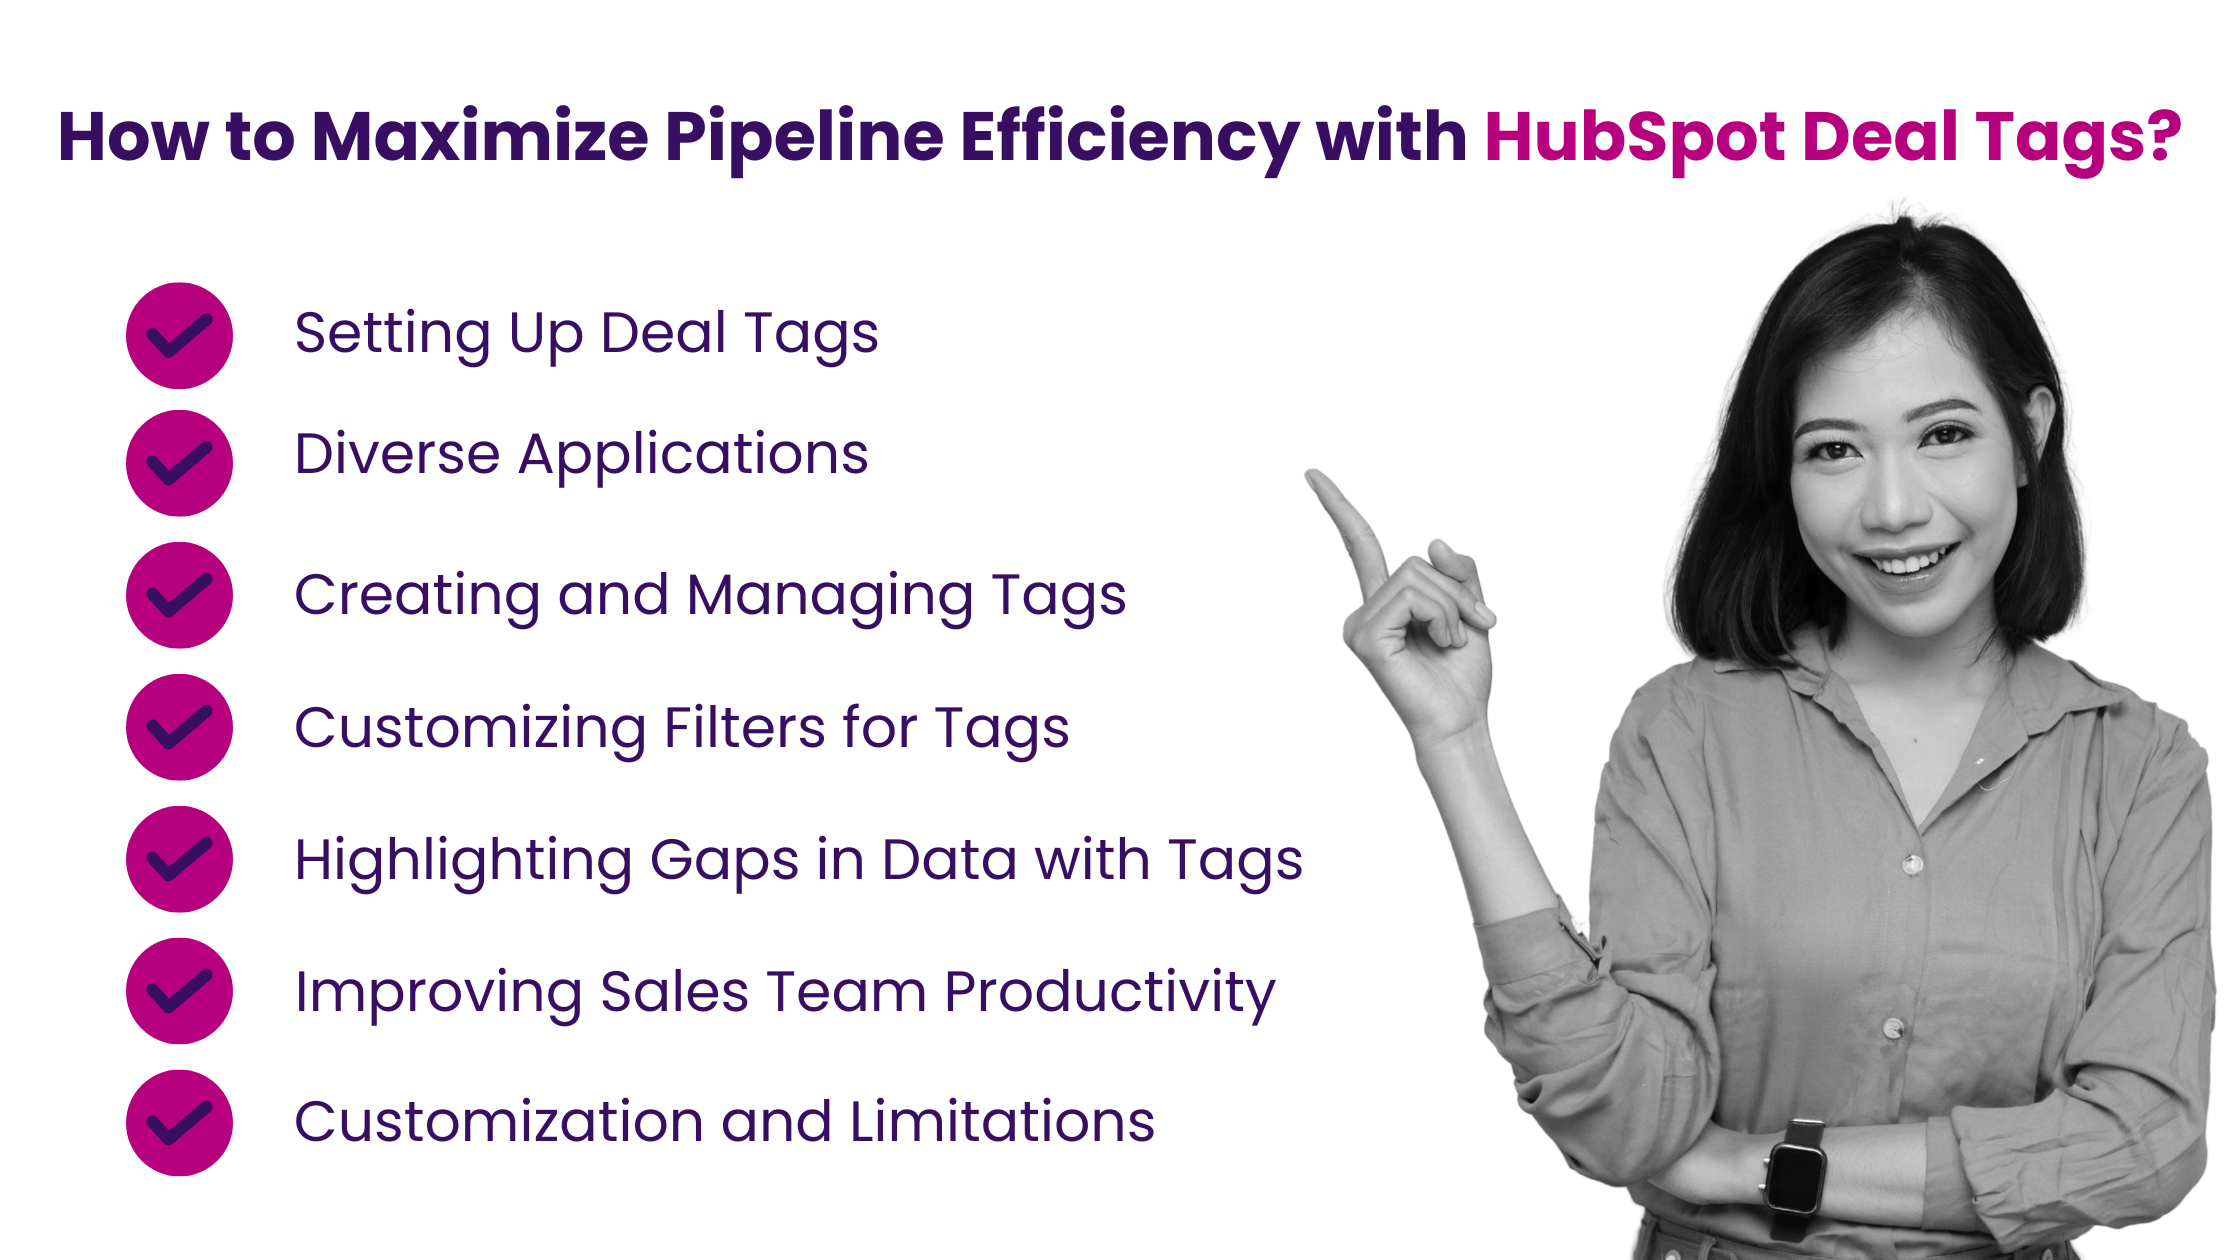 How to Maximize Pipeline Efficiency with HubSpot Deal Tags